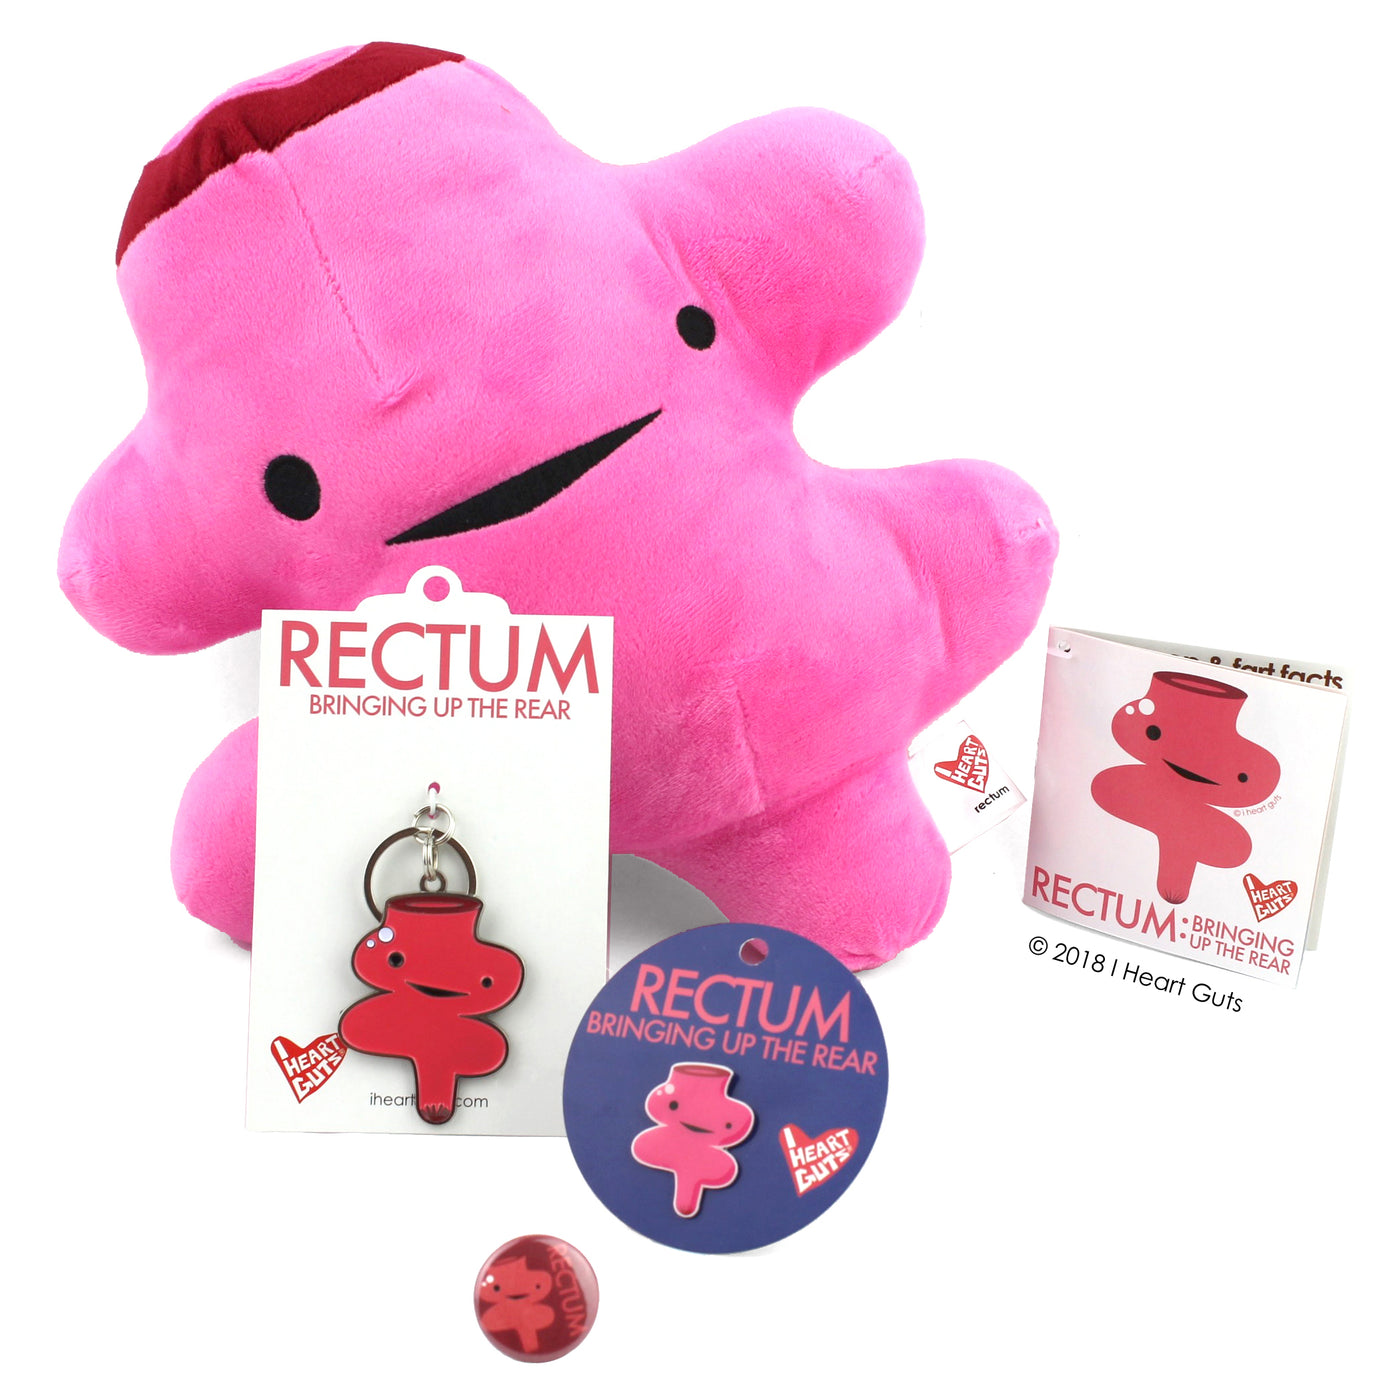 Rectum Keychain - Funny Rectal Surgery Keychain - Cute Colorectal Awareness Keychains